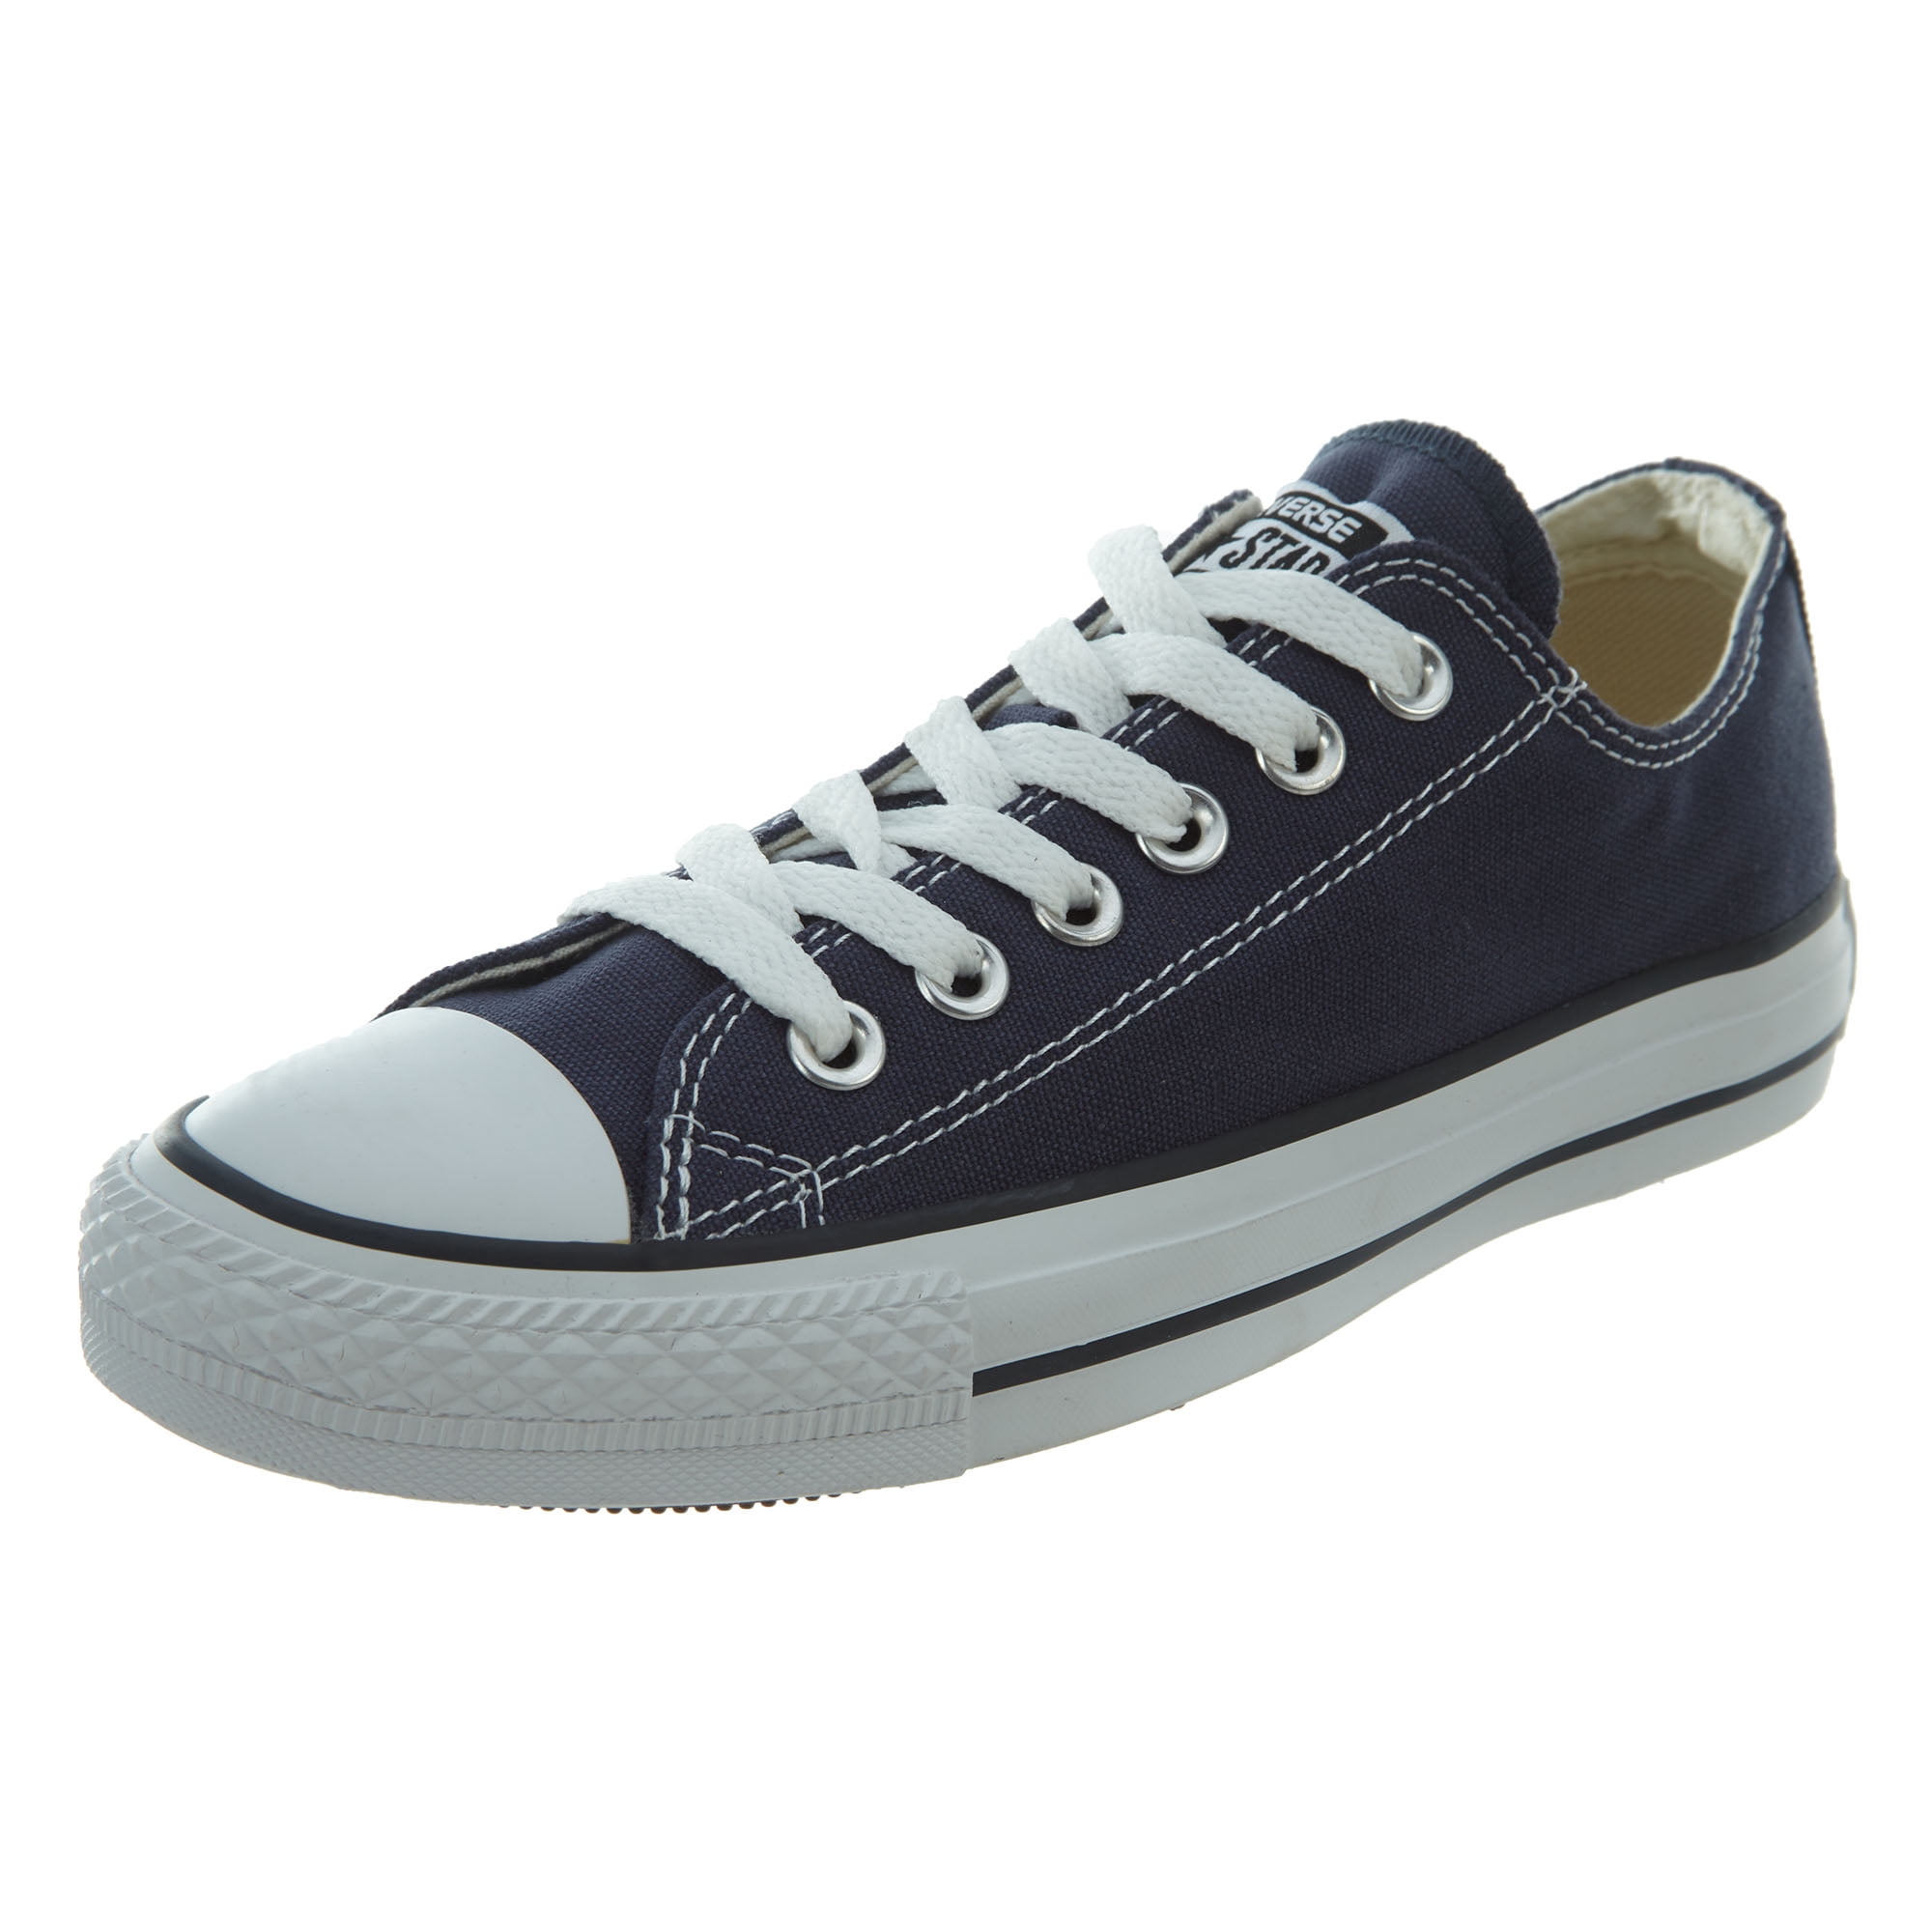 Converse - Converse M9697C-070 Unisex Chuck Taylor All Star Low Top ...